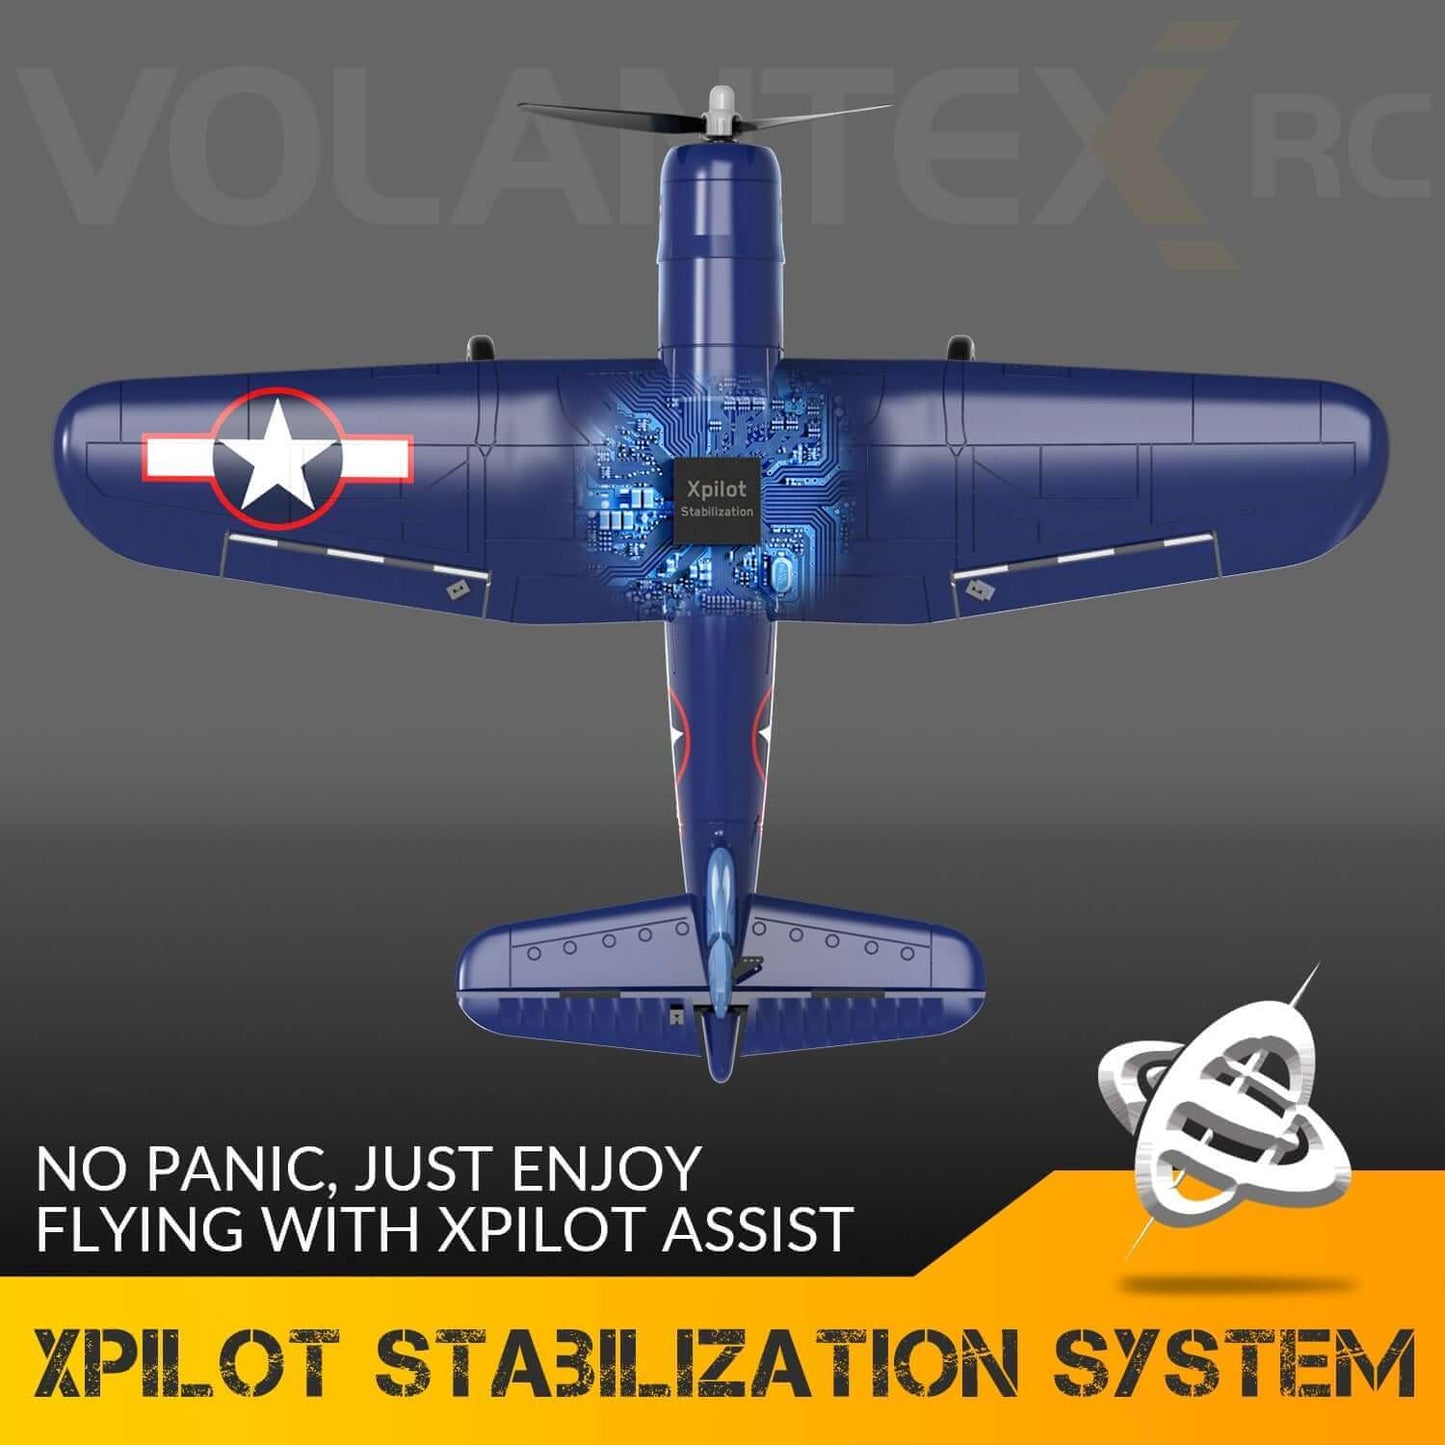 New F4U Corsair RC Plane - 2.4Ghz 4CH, 400mm Wingspan, One-Key Aerobatic, RTF Remote Control Aircraft - Perfect Gift for Children at Kidstoylover